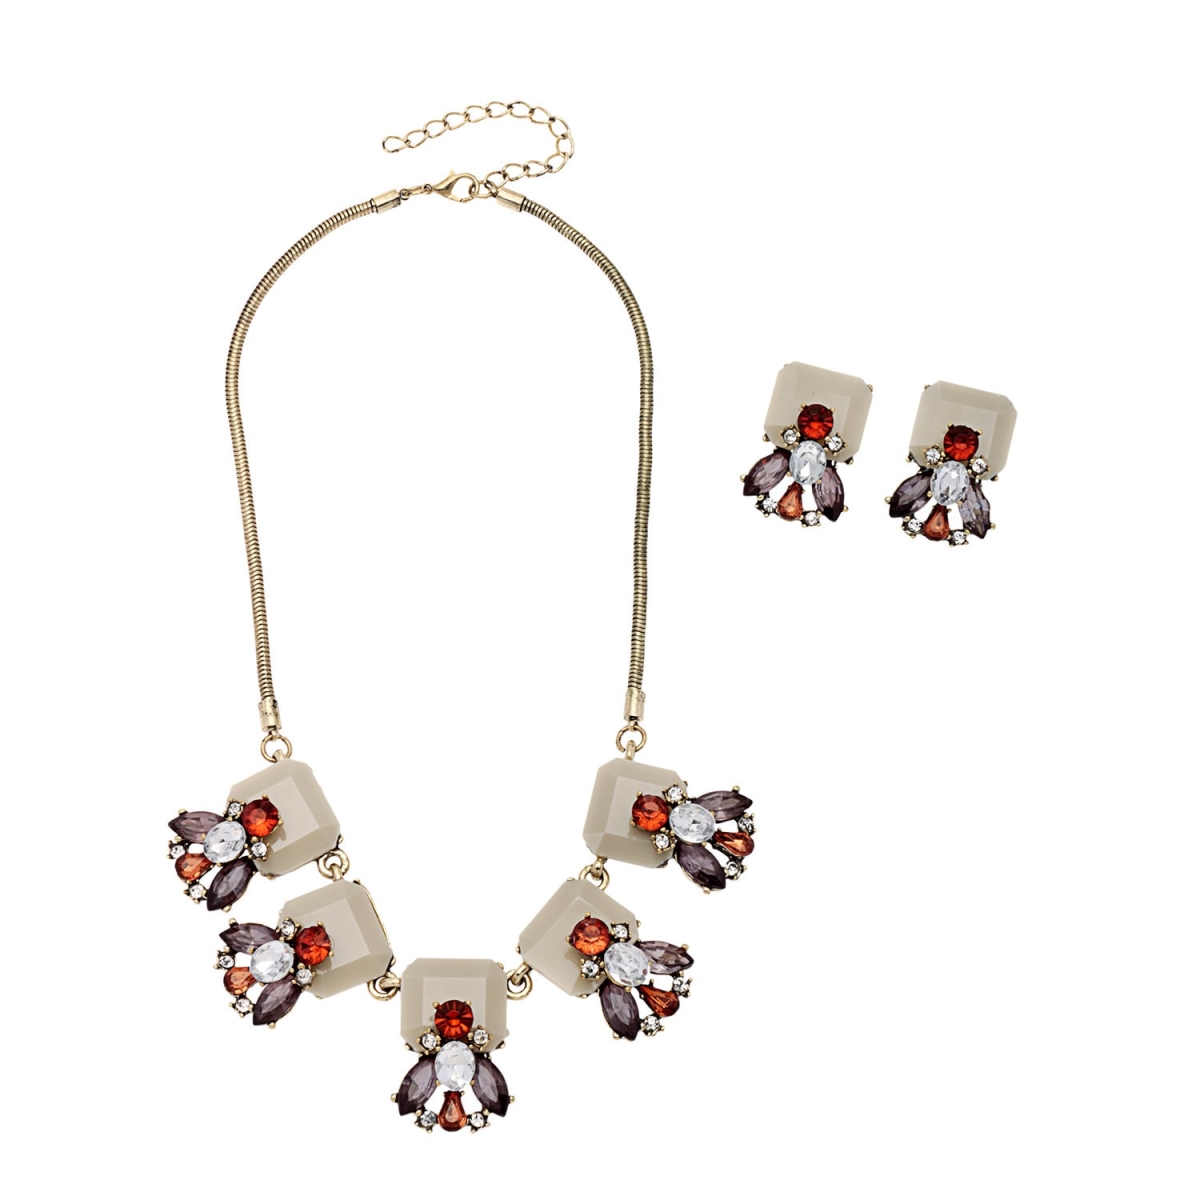 Picture of J&H Designs 7844-NE-Natural Floral Square Bib Necklace and Earrings Jewelry Set